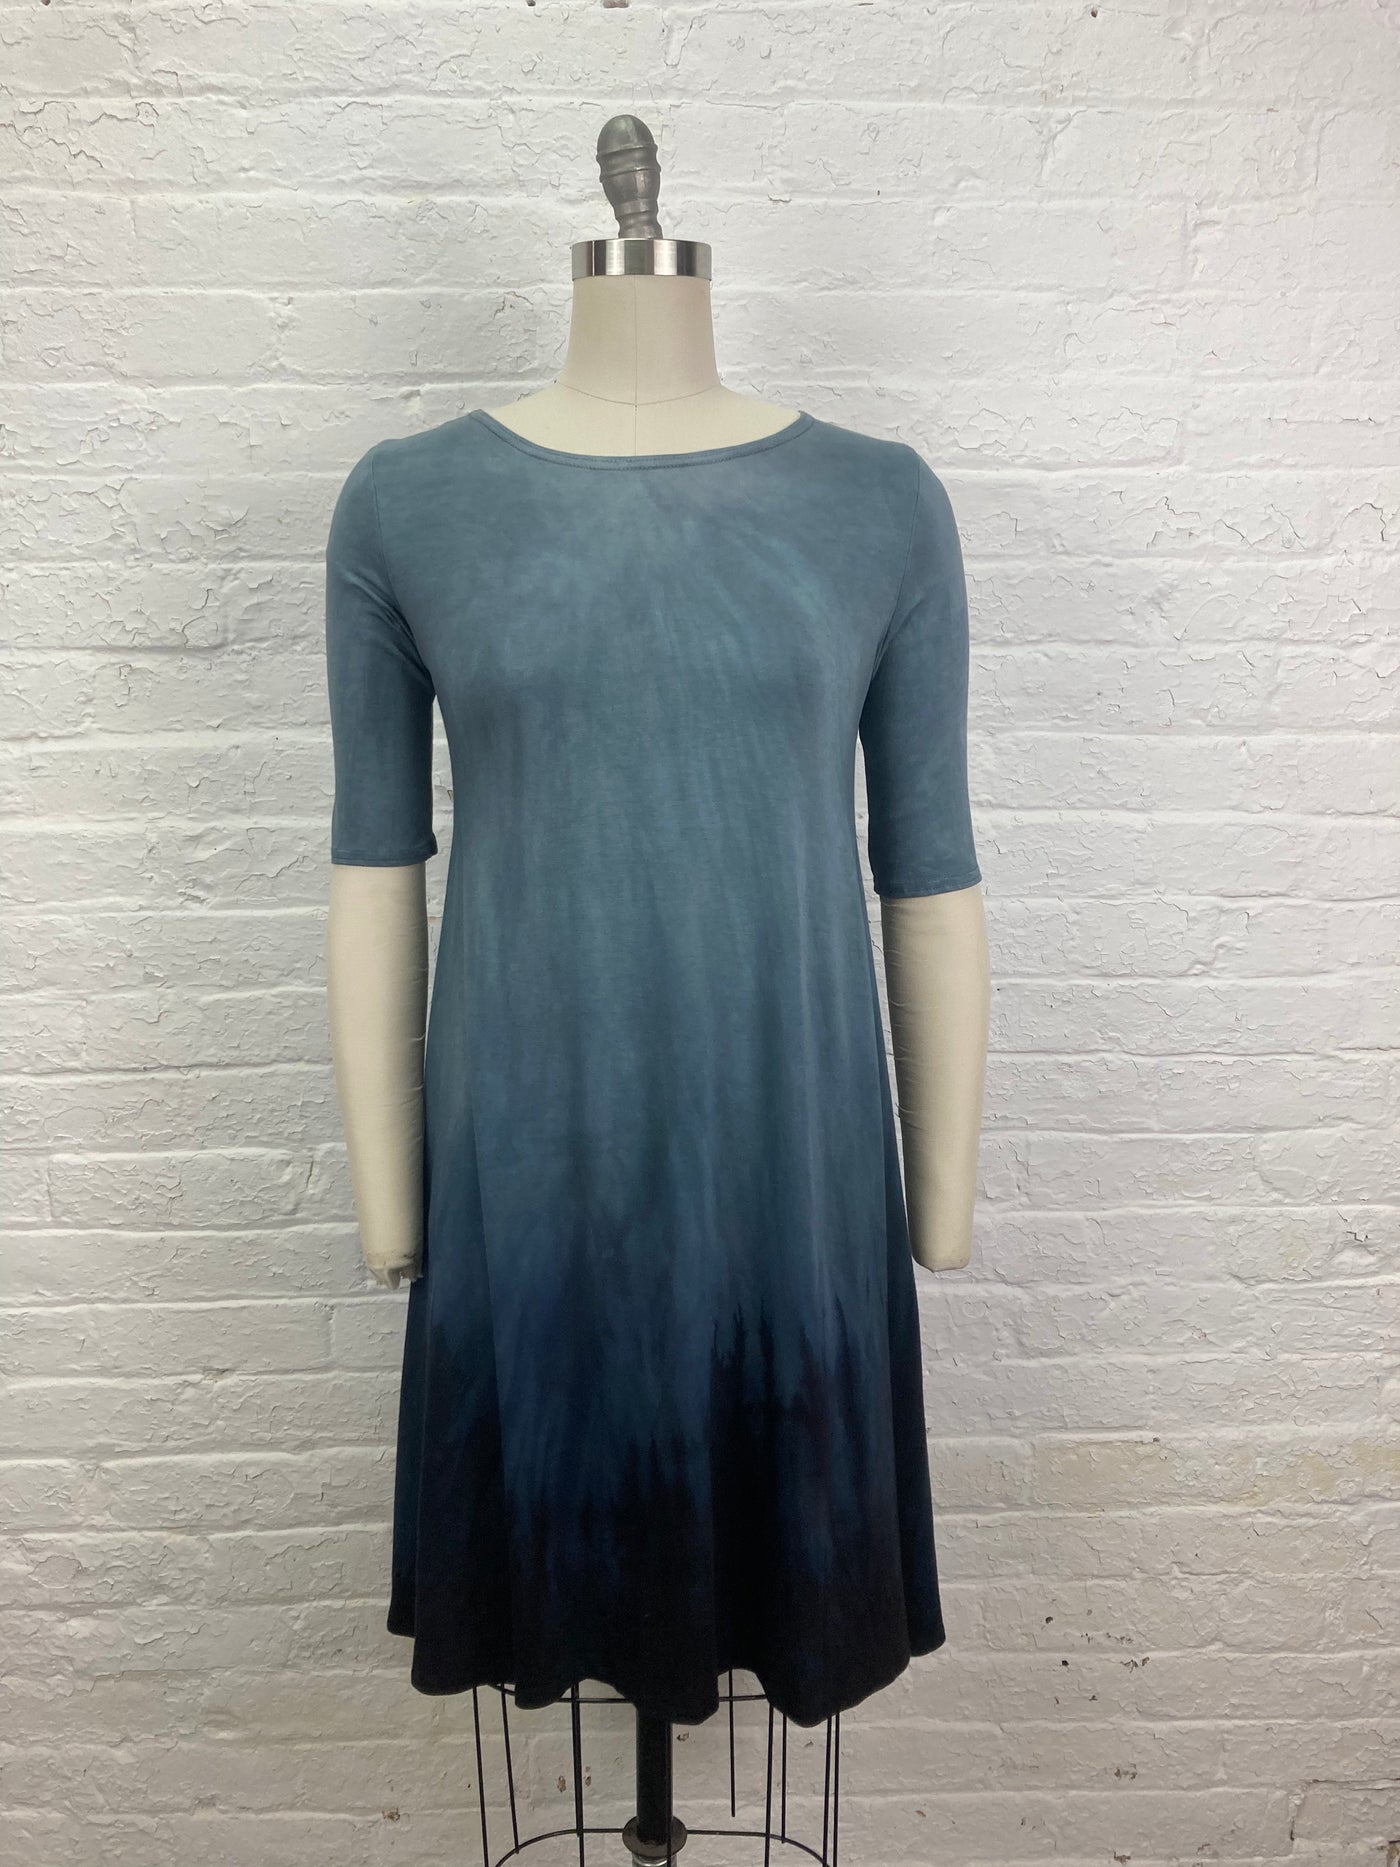 LUCILLE DRESS in Stormy Ombre